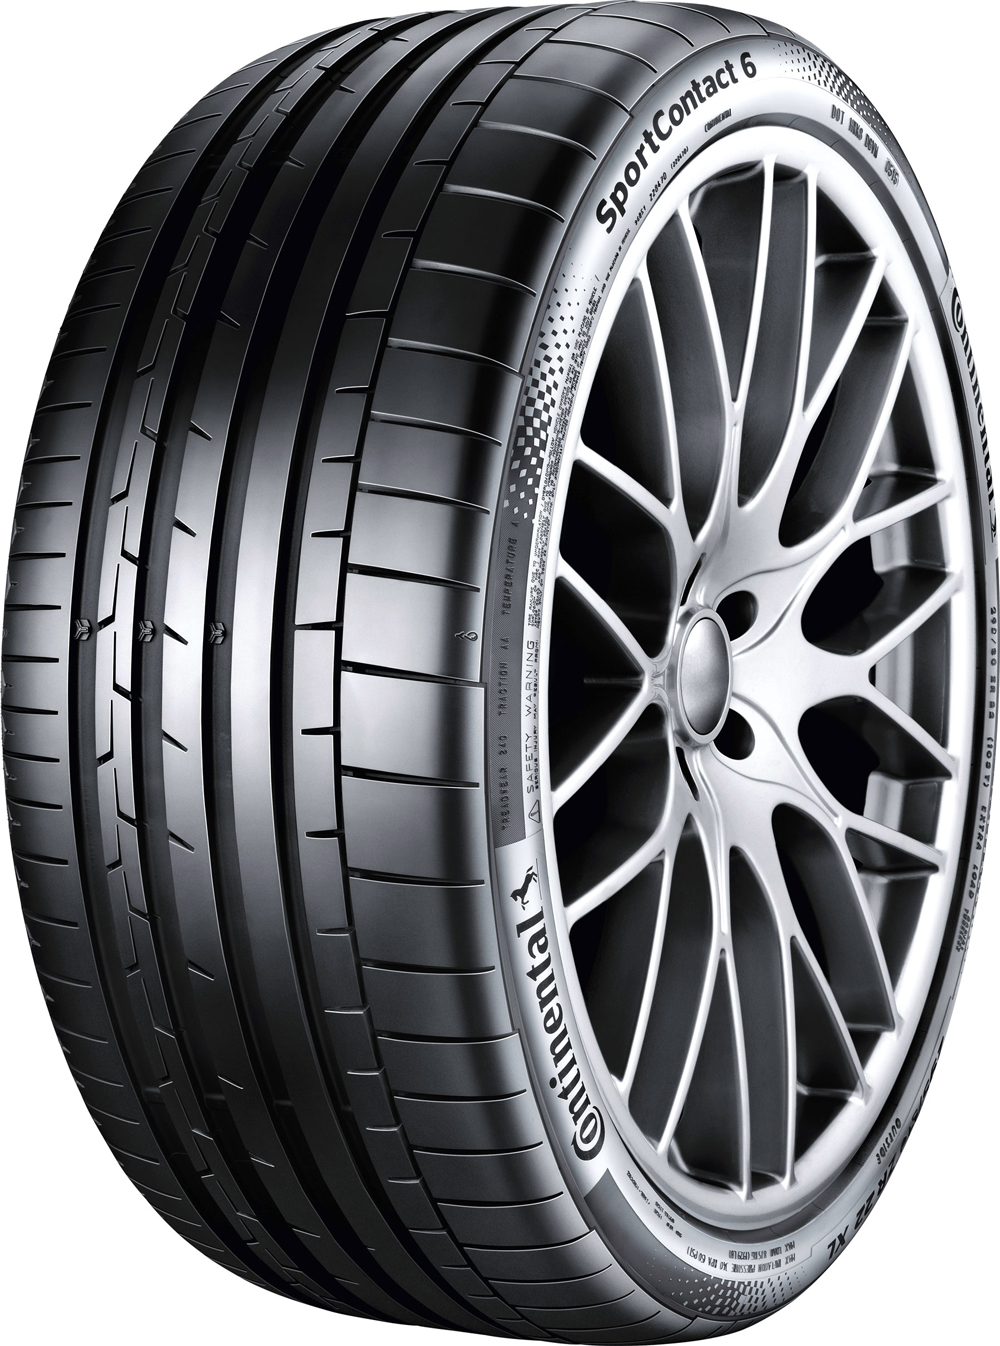 Гуми за кола CONTINENTAL SportContact 6 ContiSilent XL AUDI 255/35 R21 98Y